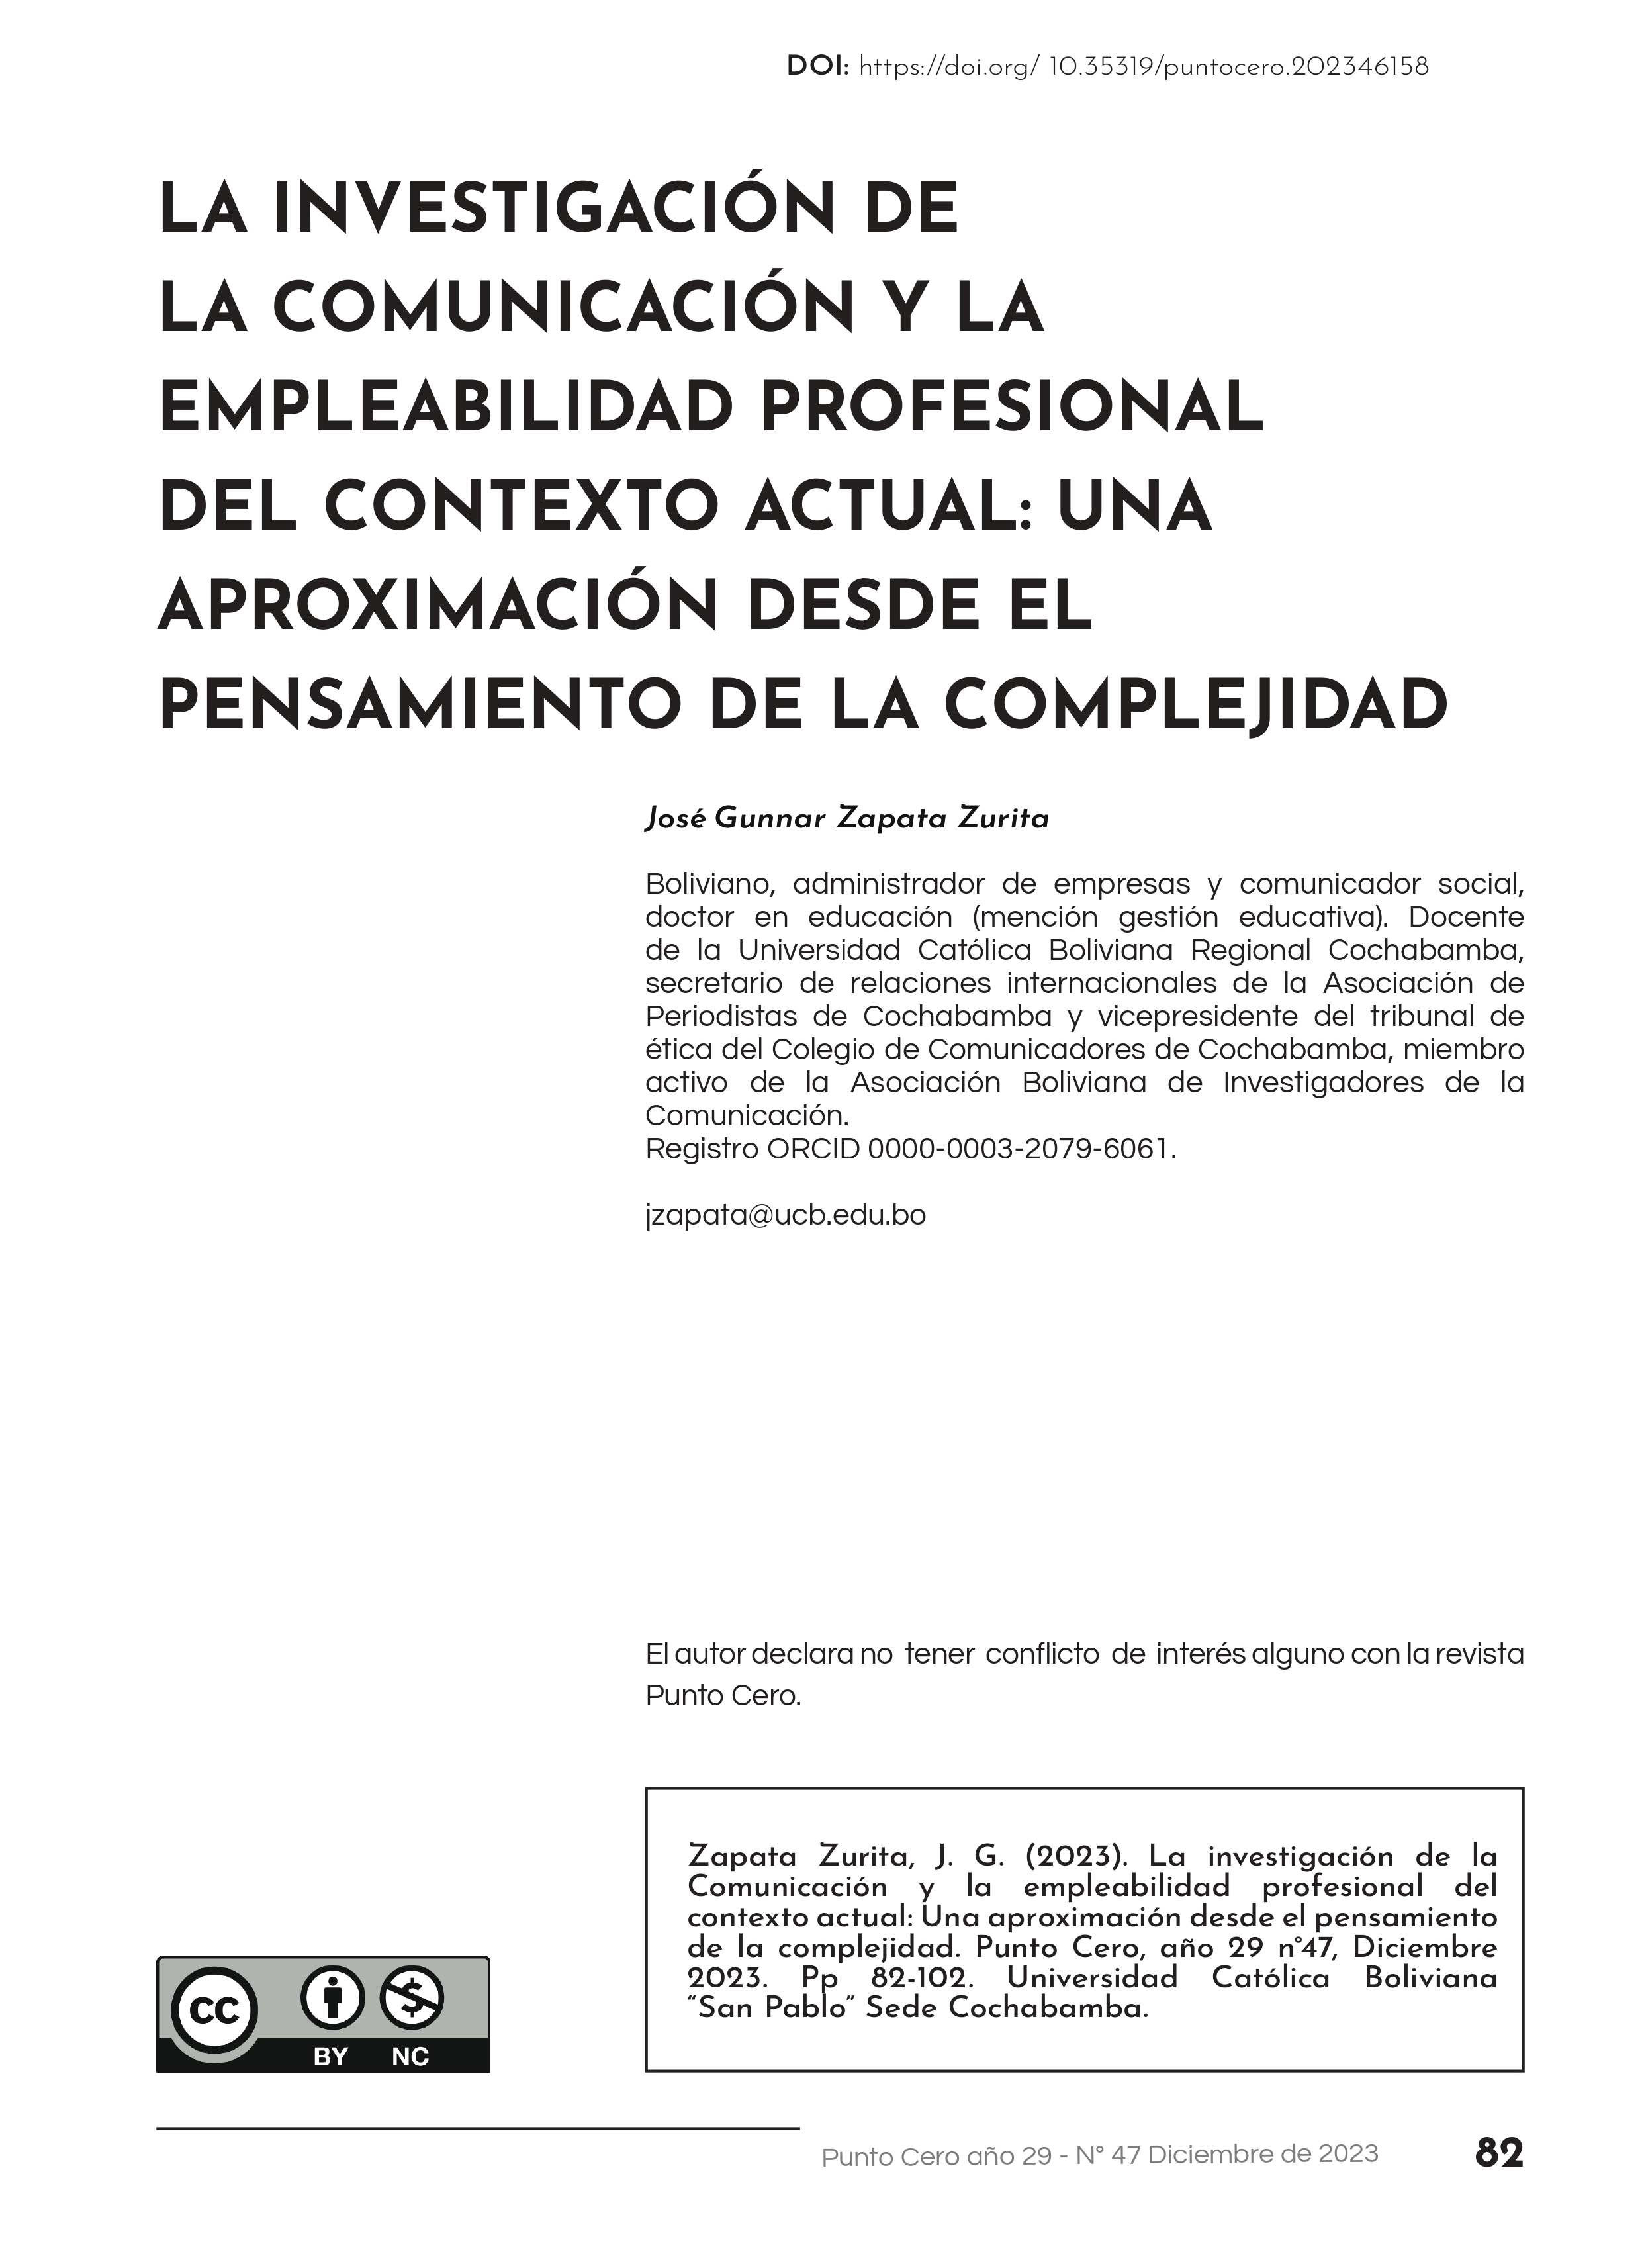 Communication research and professional employability in the current context: an approach from complexity thinking